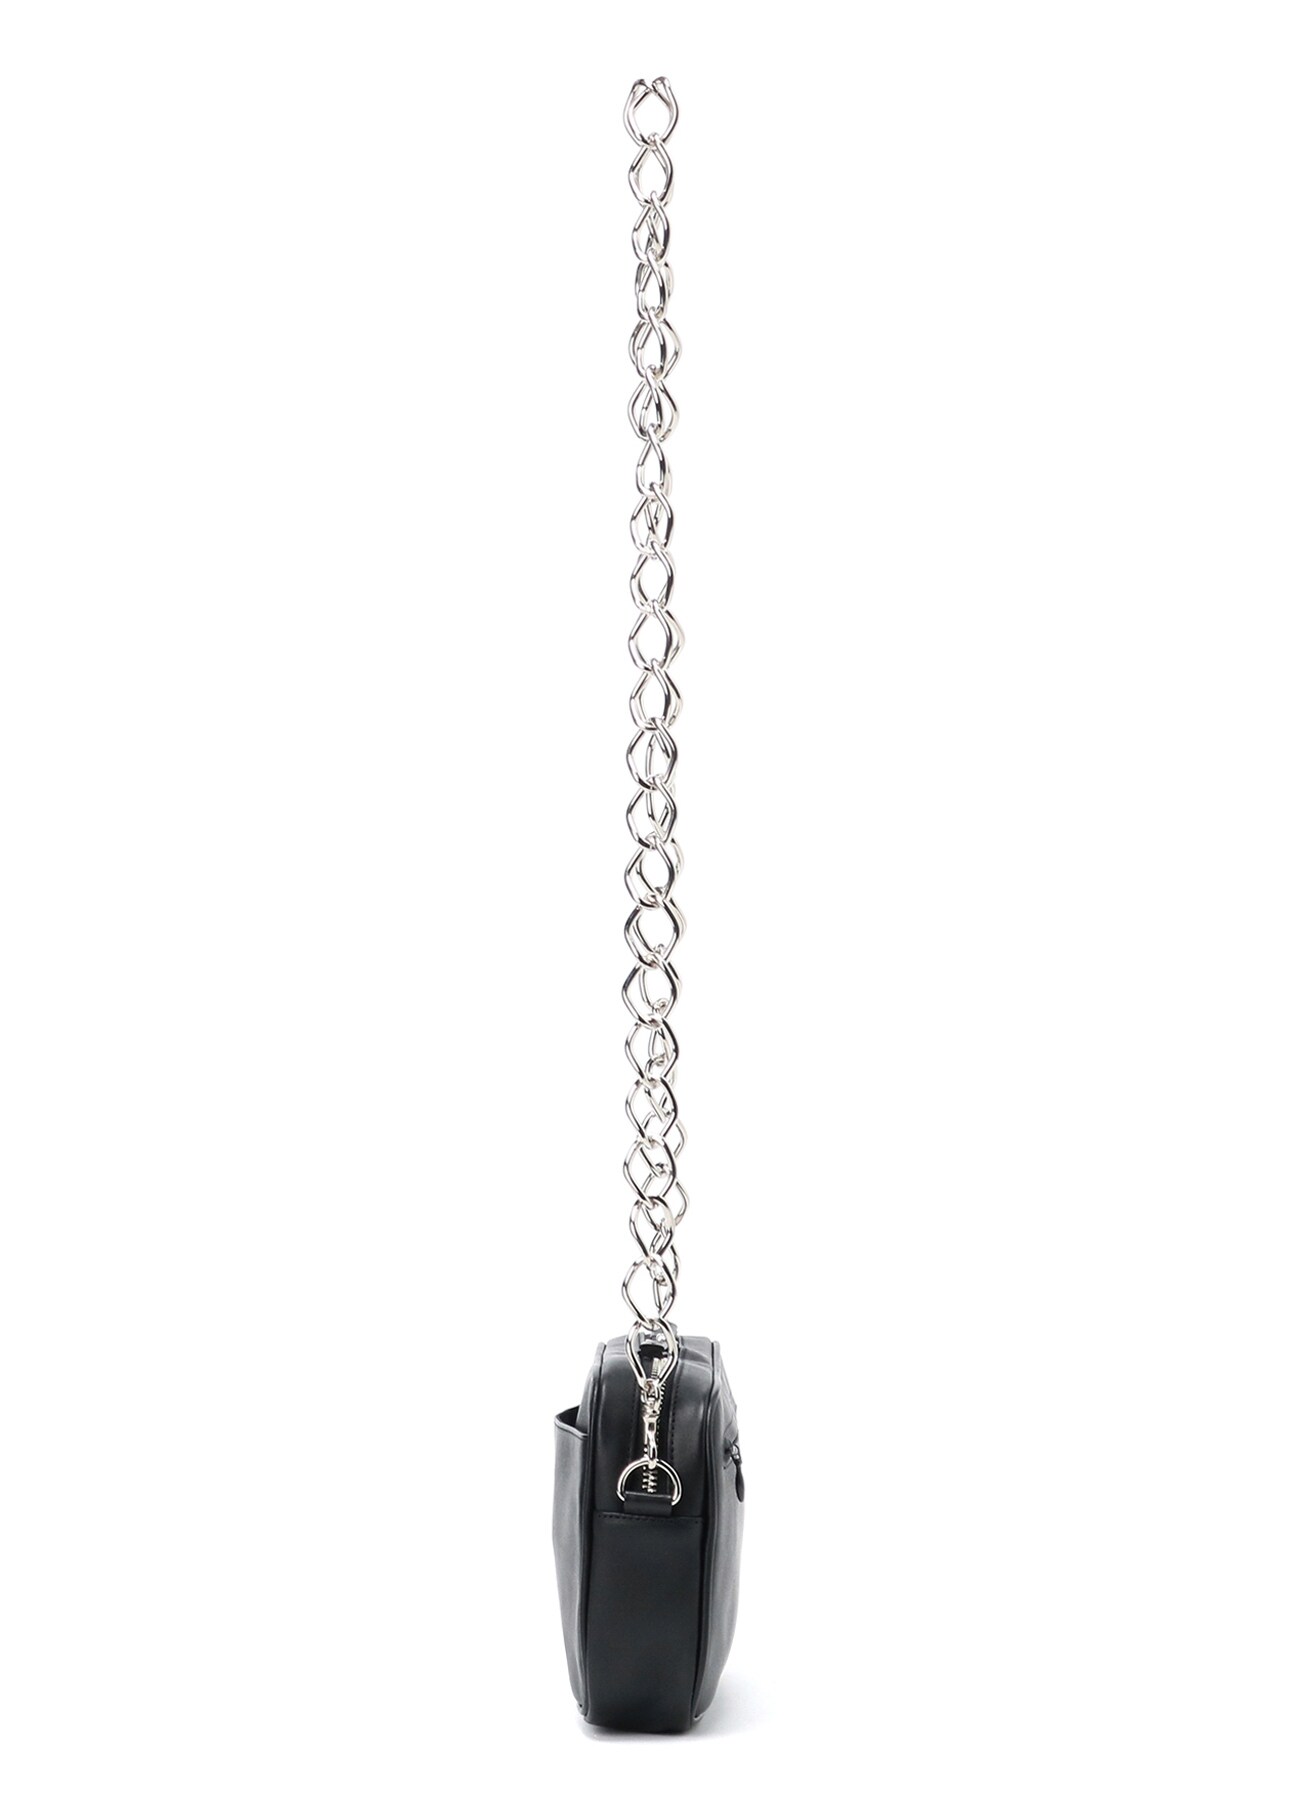 GRAINY LEATHER CHAIN BODY BAG